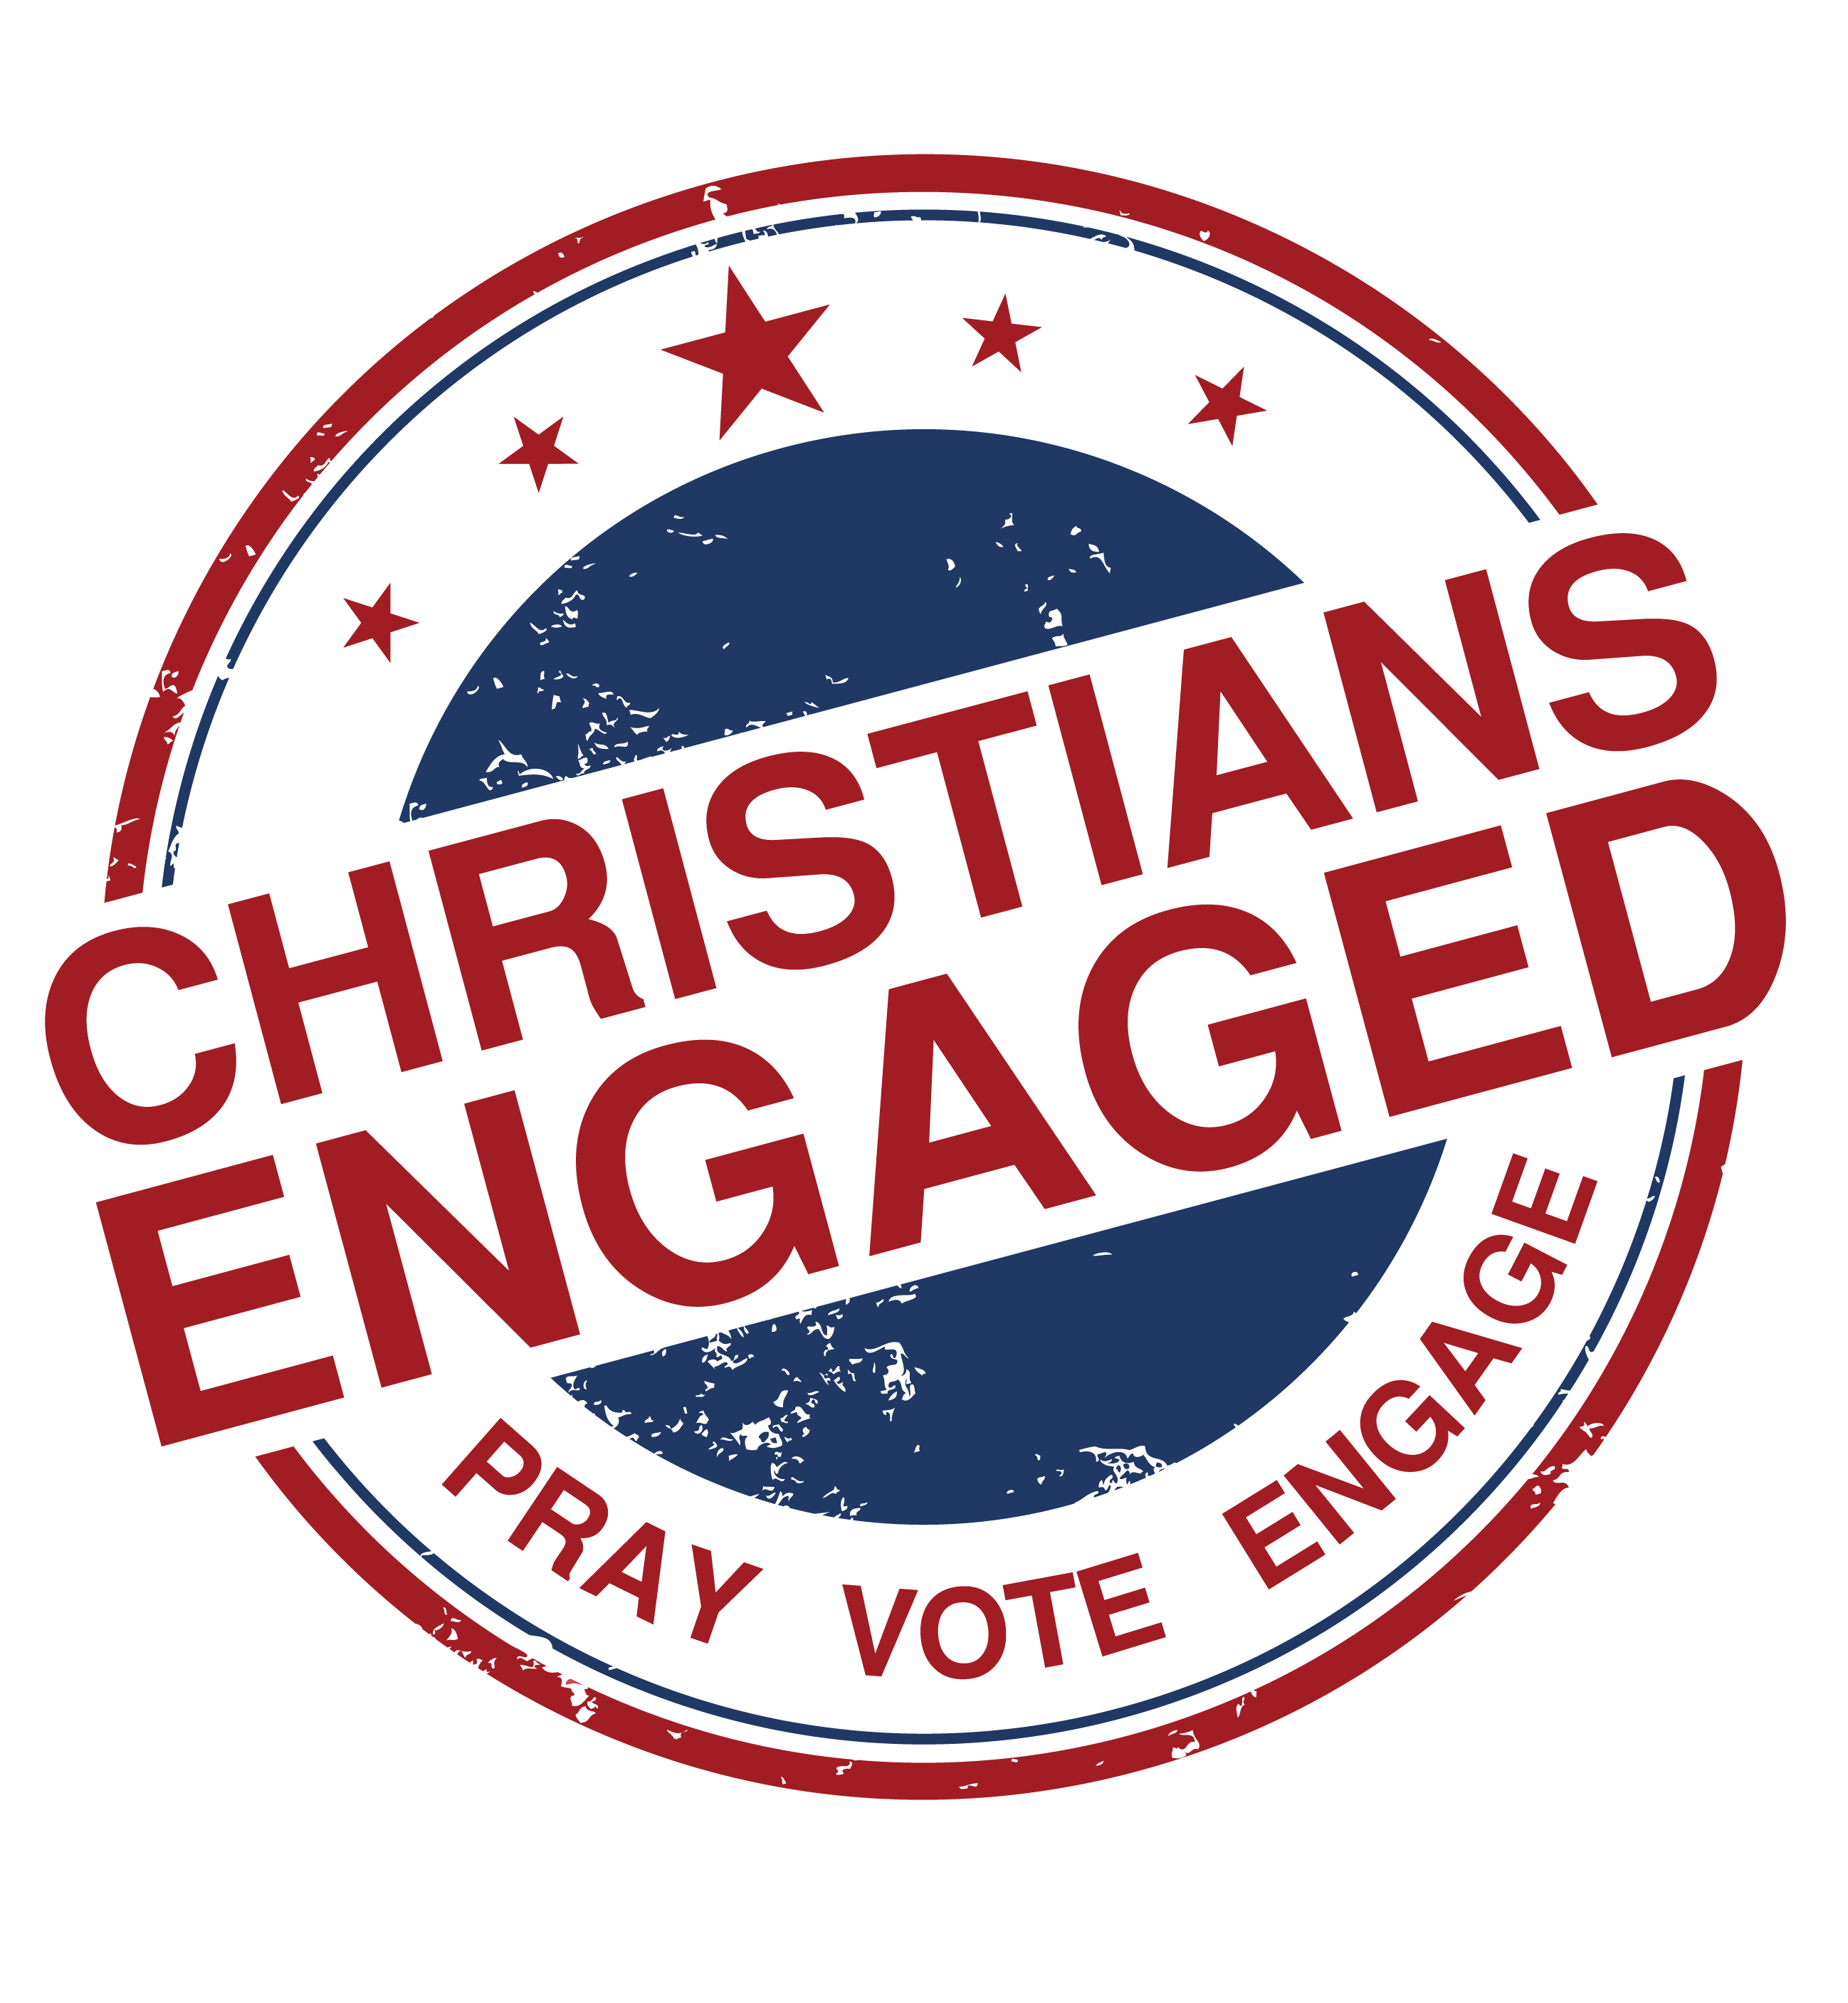 Awakening, educating, and empowering believers in Jesus Christ to: PRAY, VOTE, & ENGAGE. Voting reminders for all 50 states, classes, and much more.